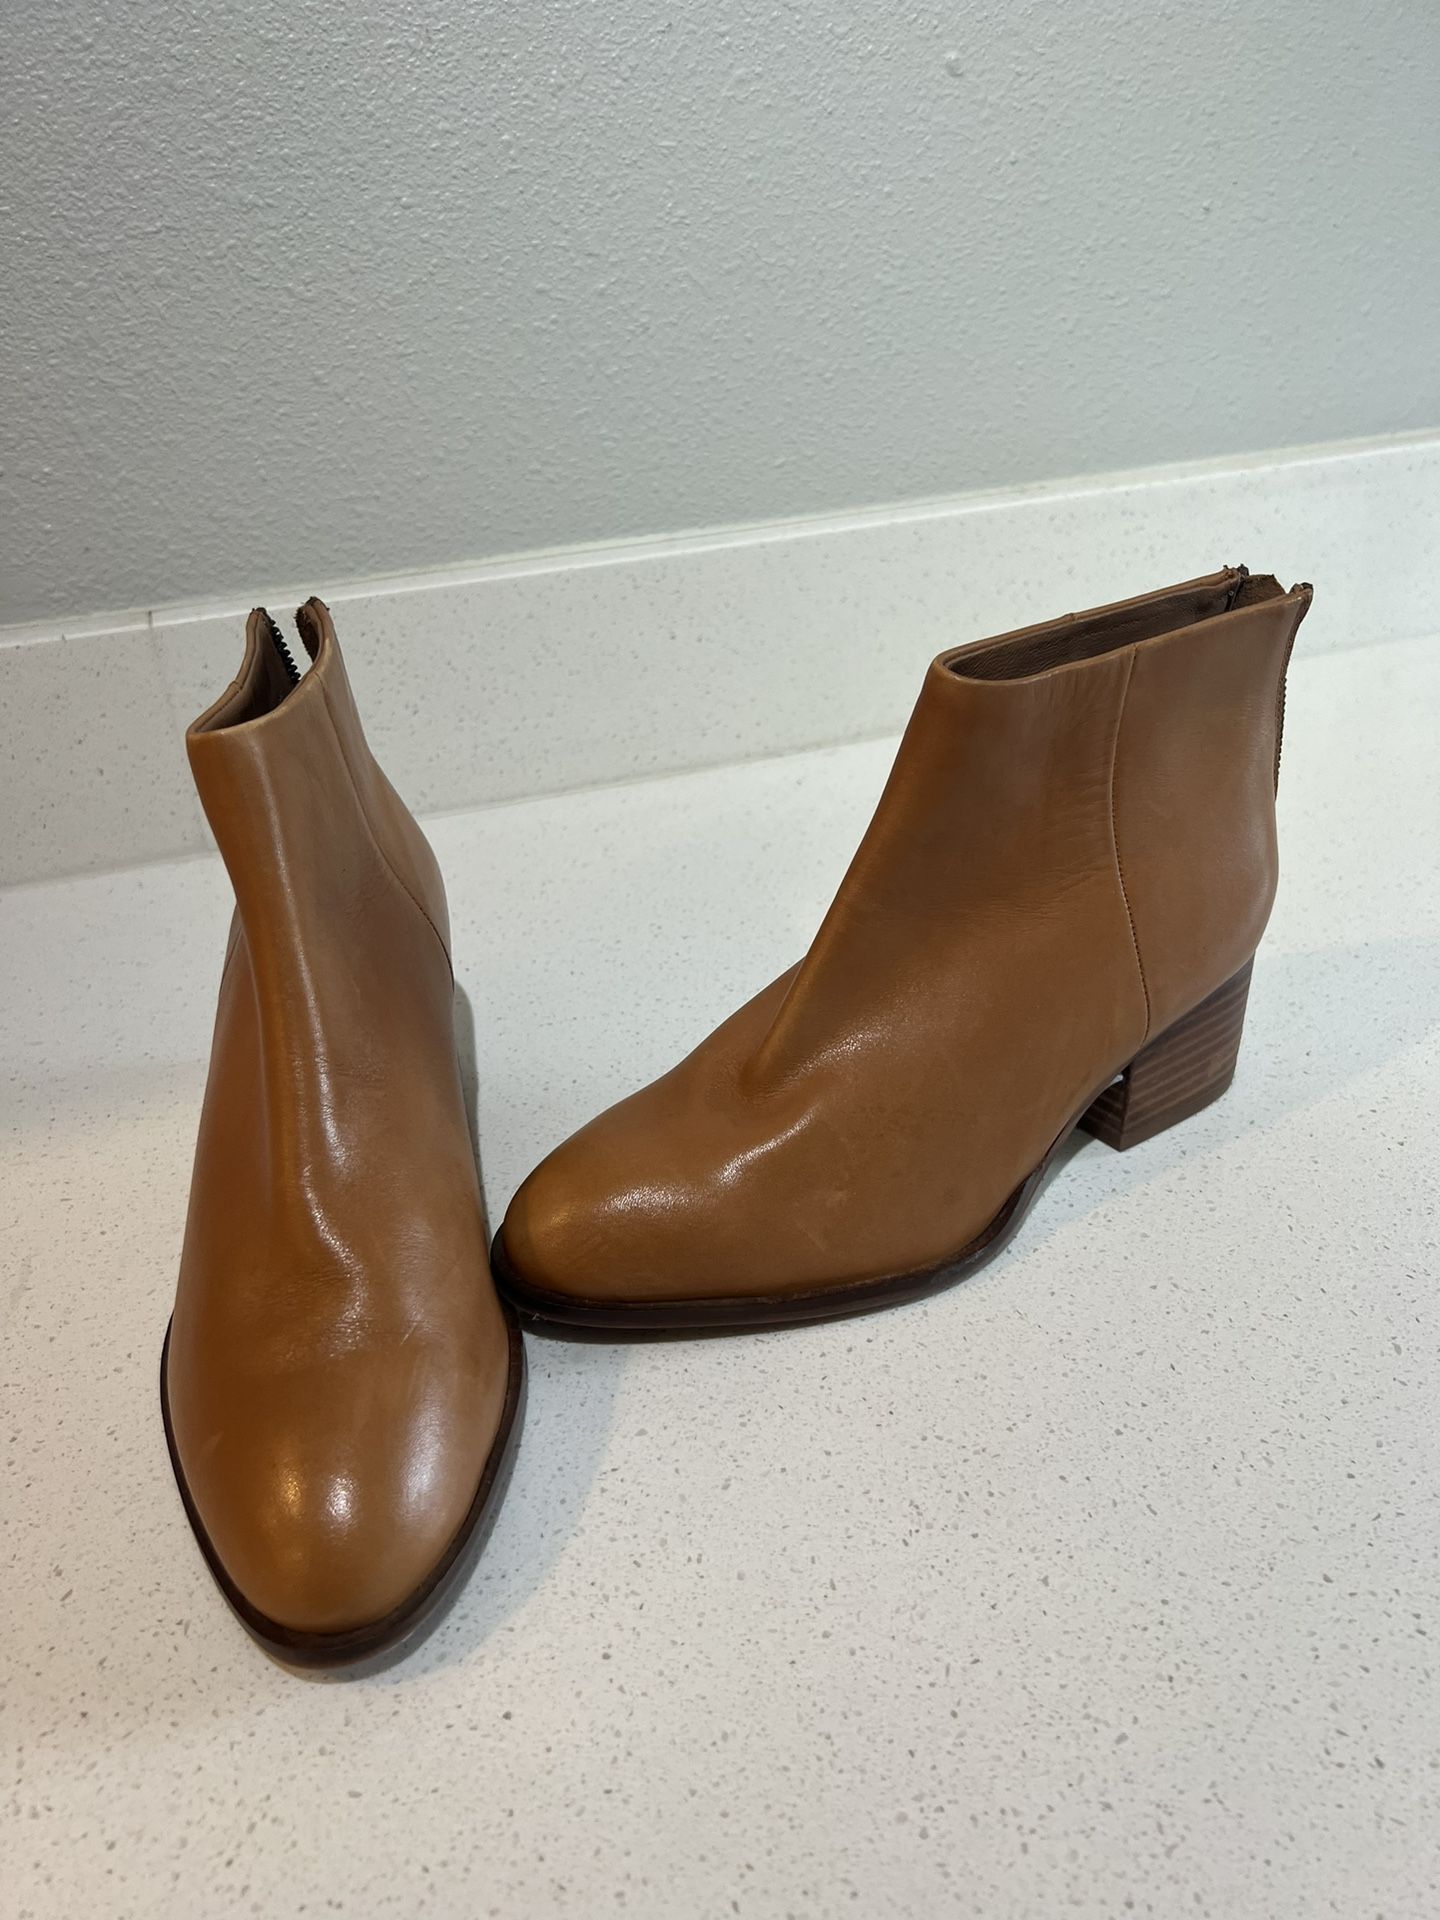 Women’s Size 7.5 Seychelles Tan Heeled Ankle Boots